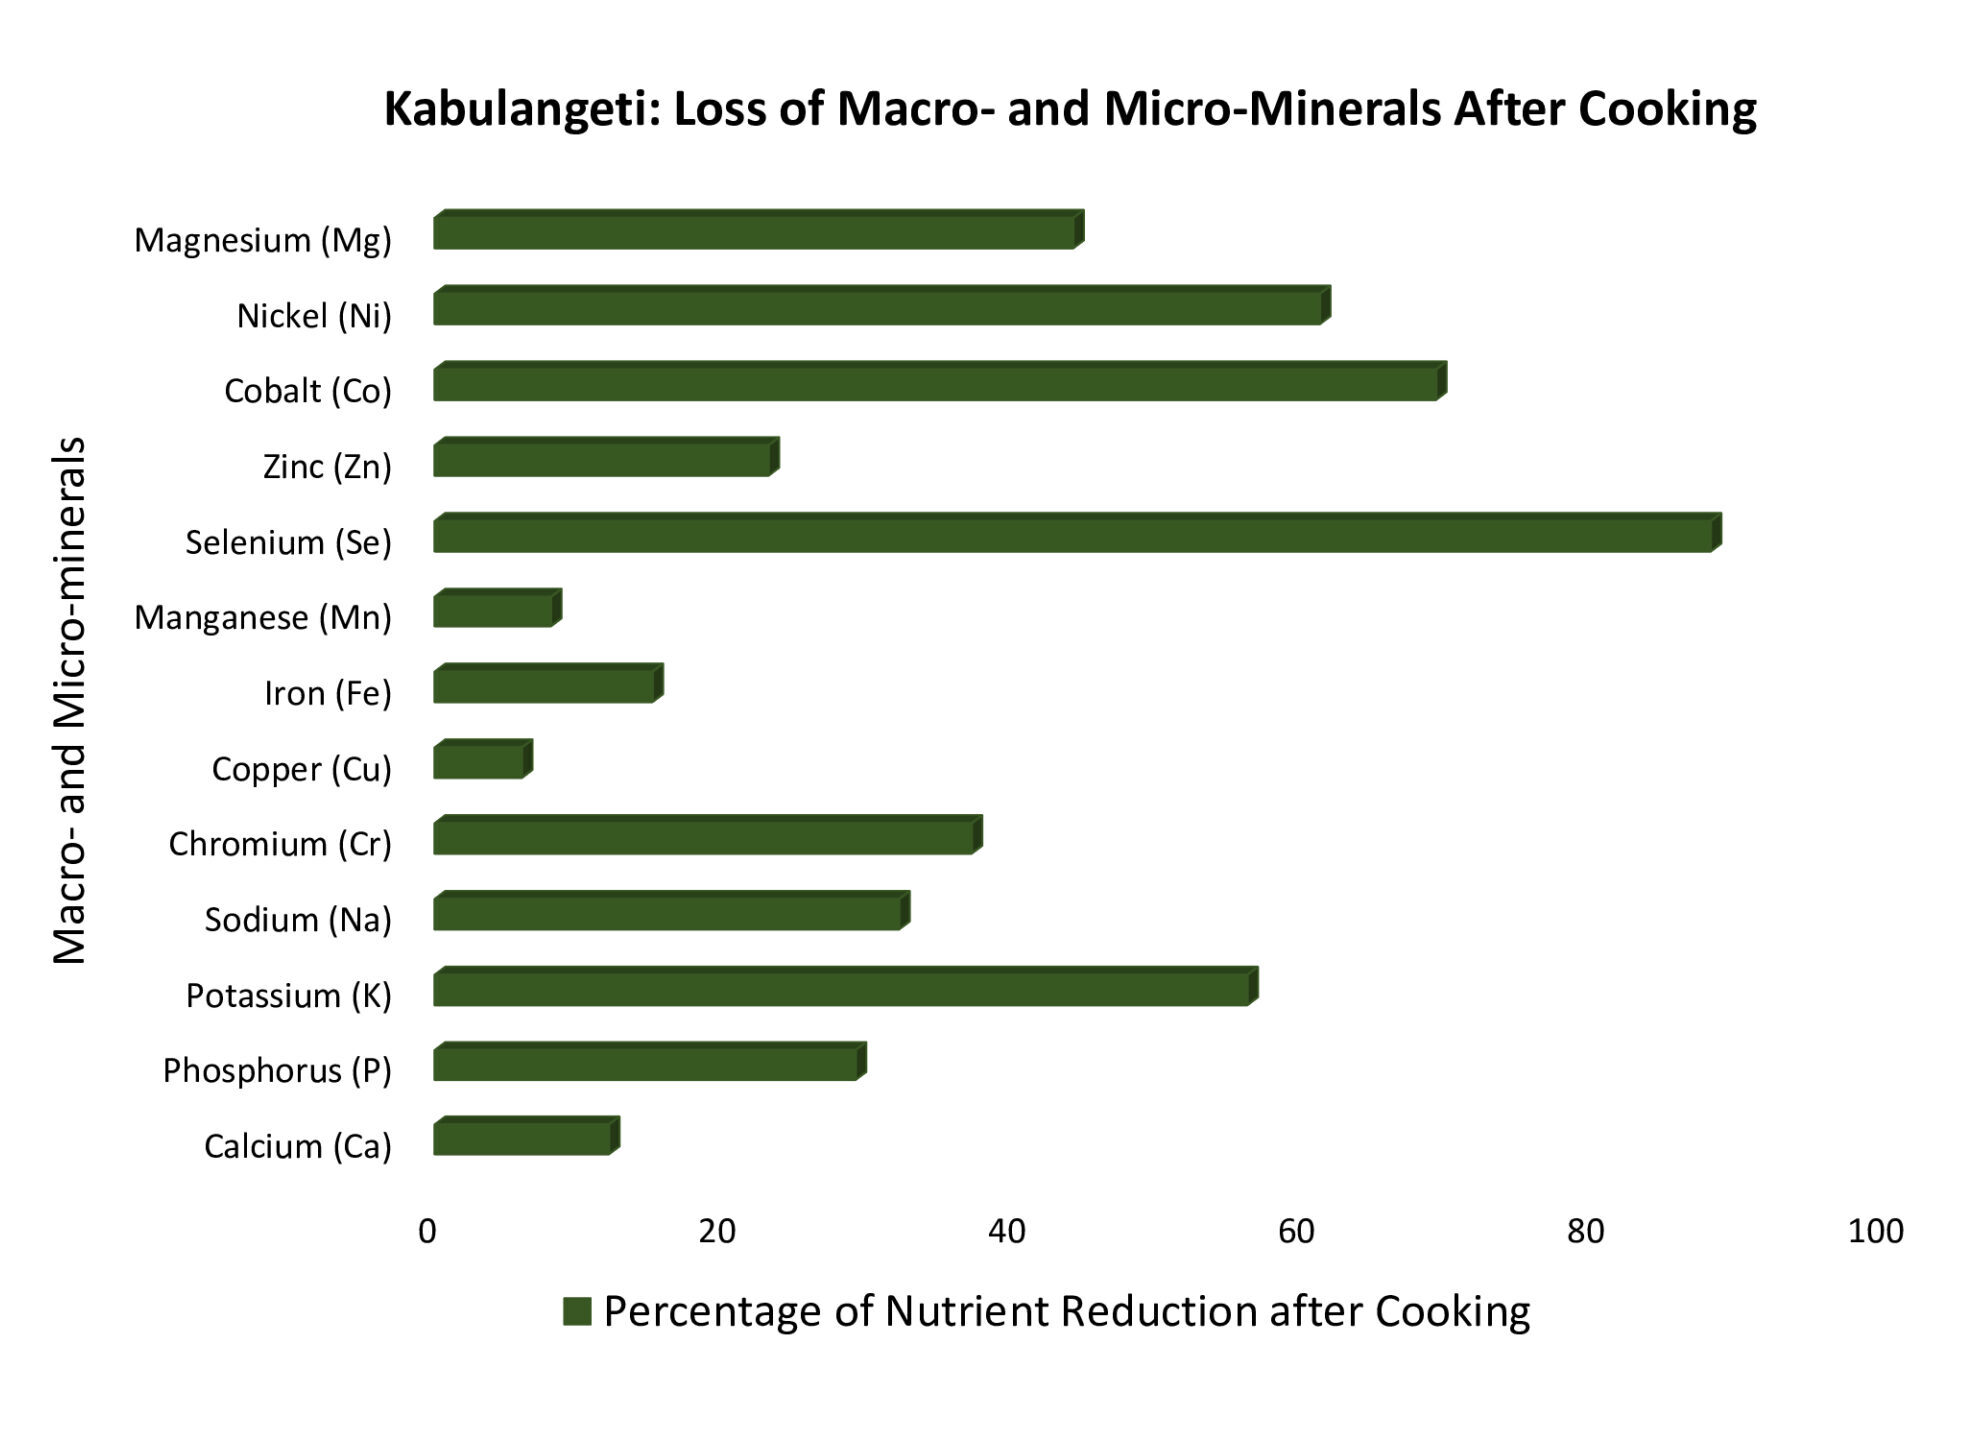 Kabulangeti-Loss-of-Minerals-after-Cooking-Beans